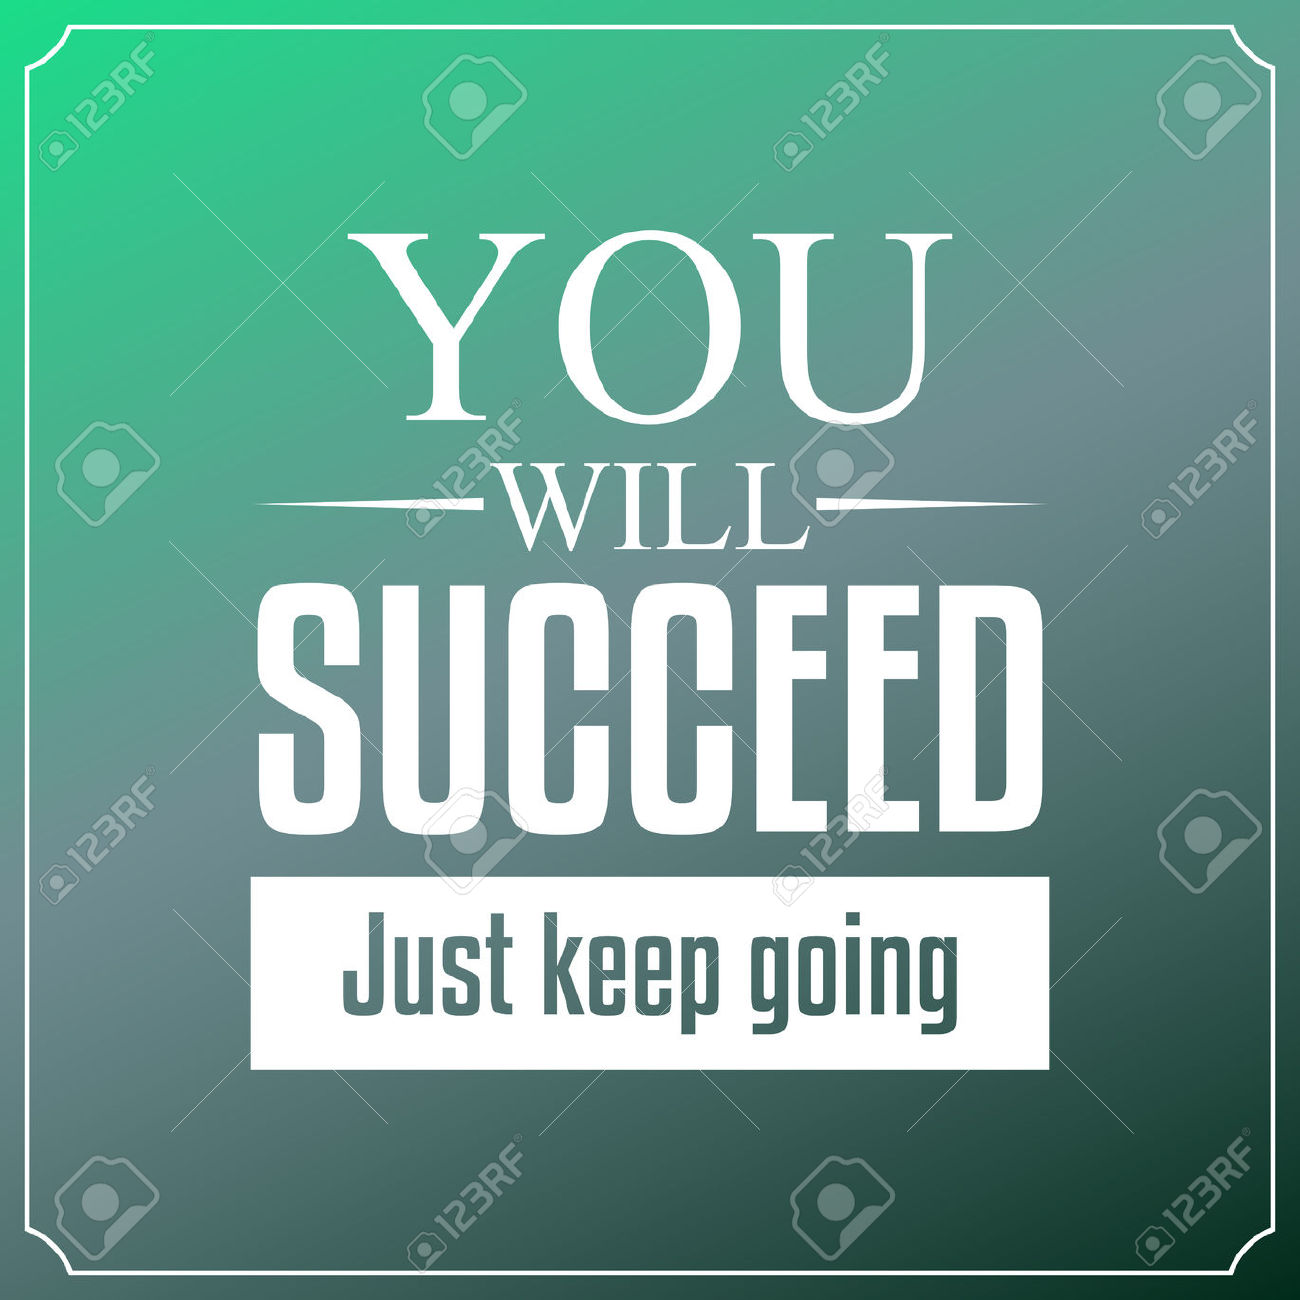 You will succeed just keep going